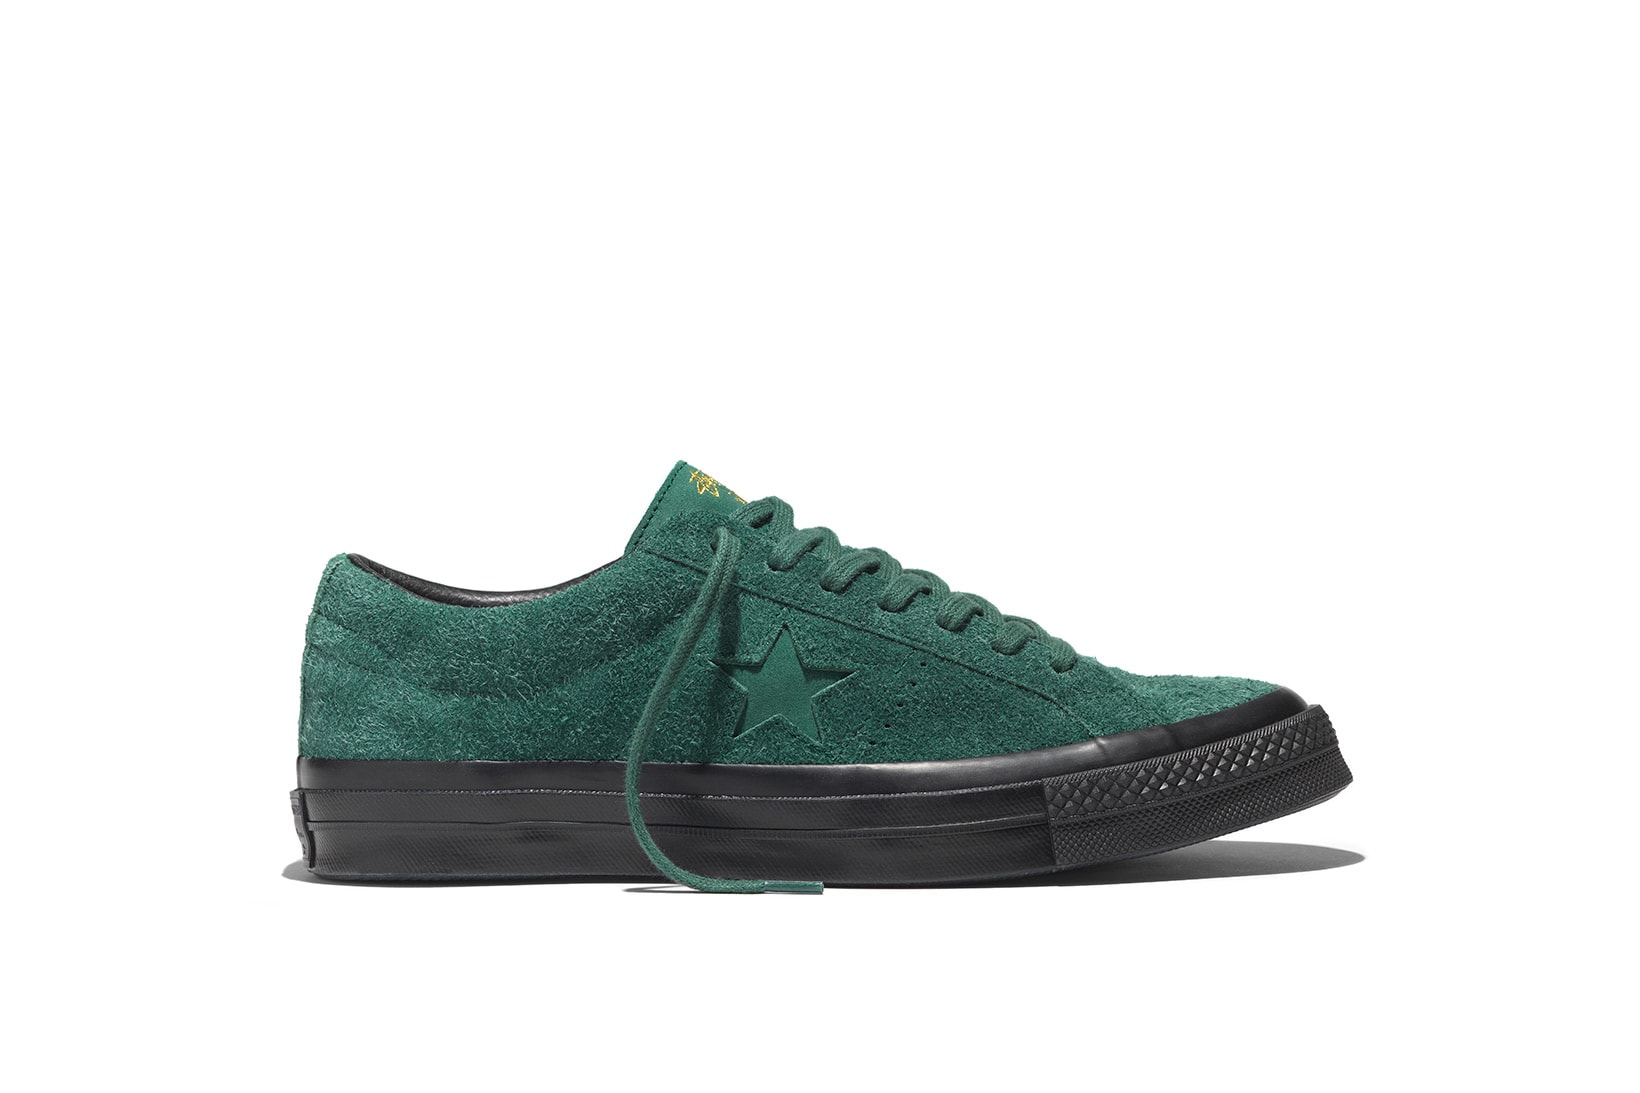 Stussy Converse One Star Silhouette